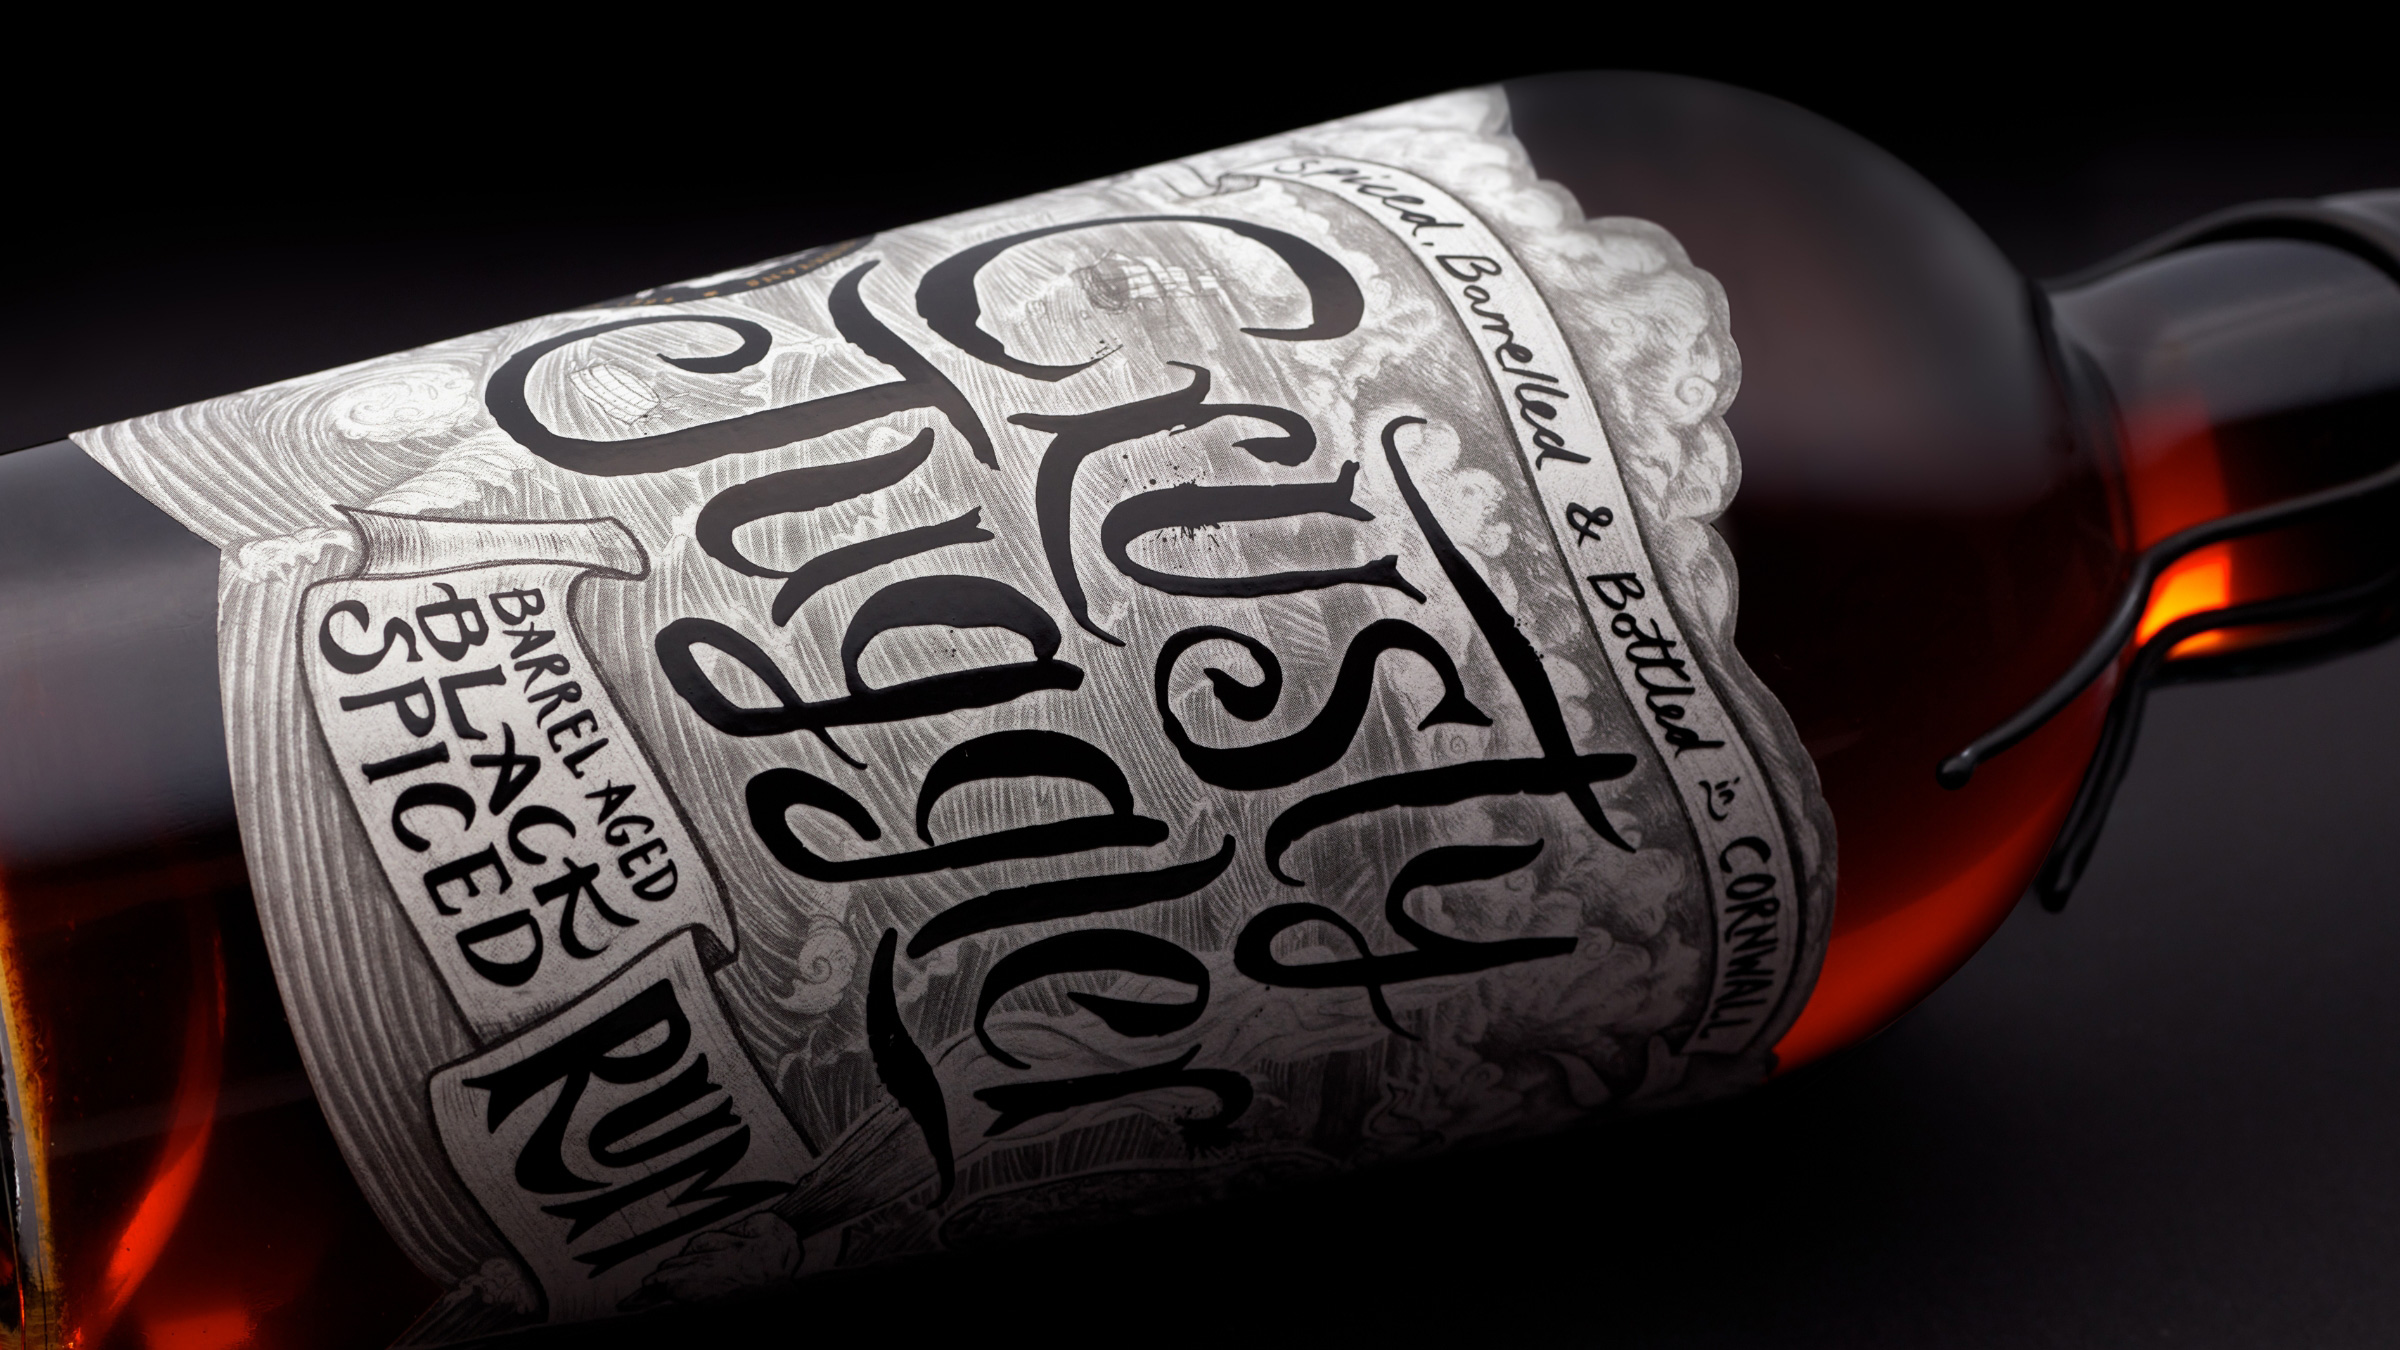 A New Legend to Behold: Adventurous Black Spiced Rum From the Cornish Coast Designed by Kingdom & Sparrow